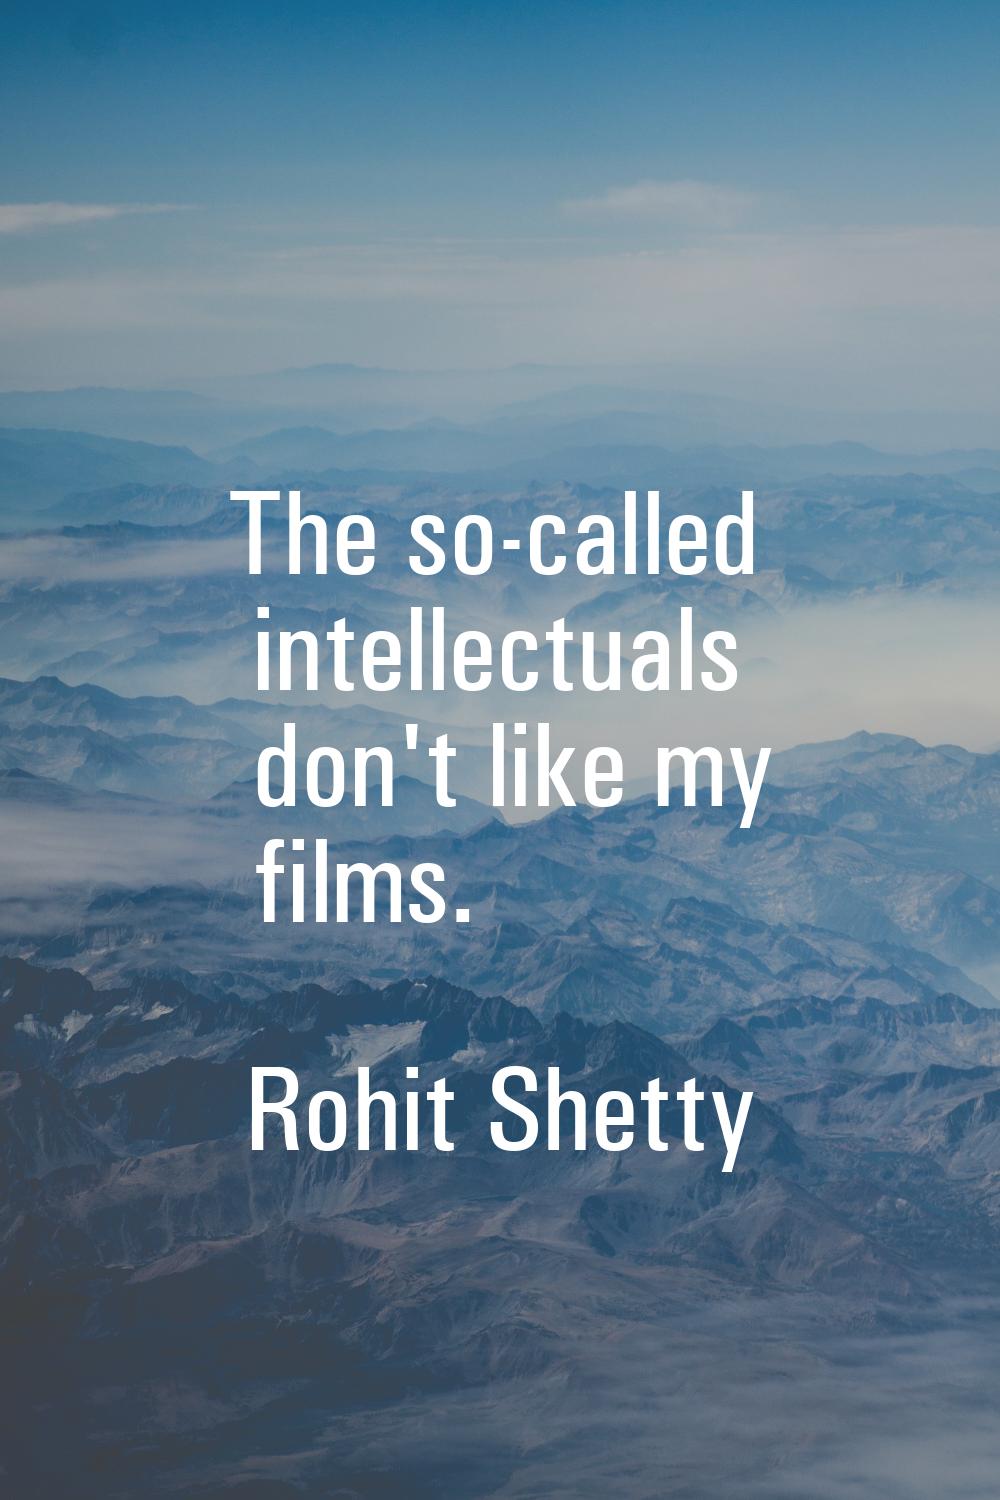 The so-called intellectuals don't like my films.